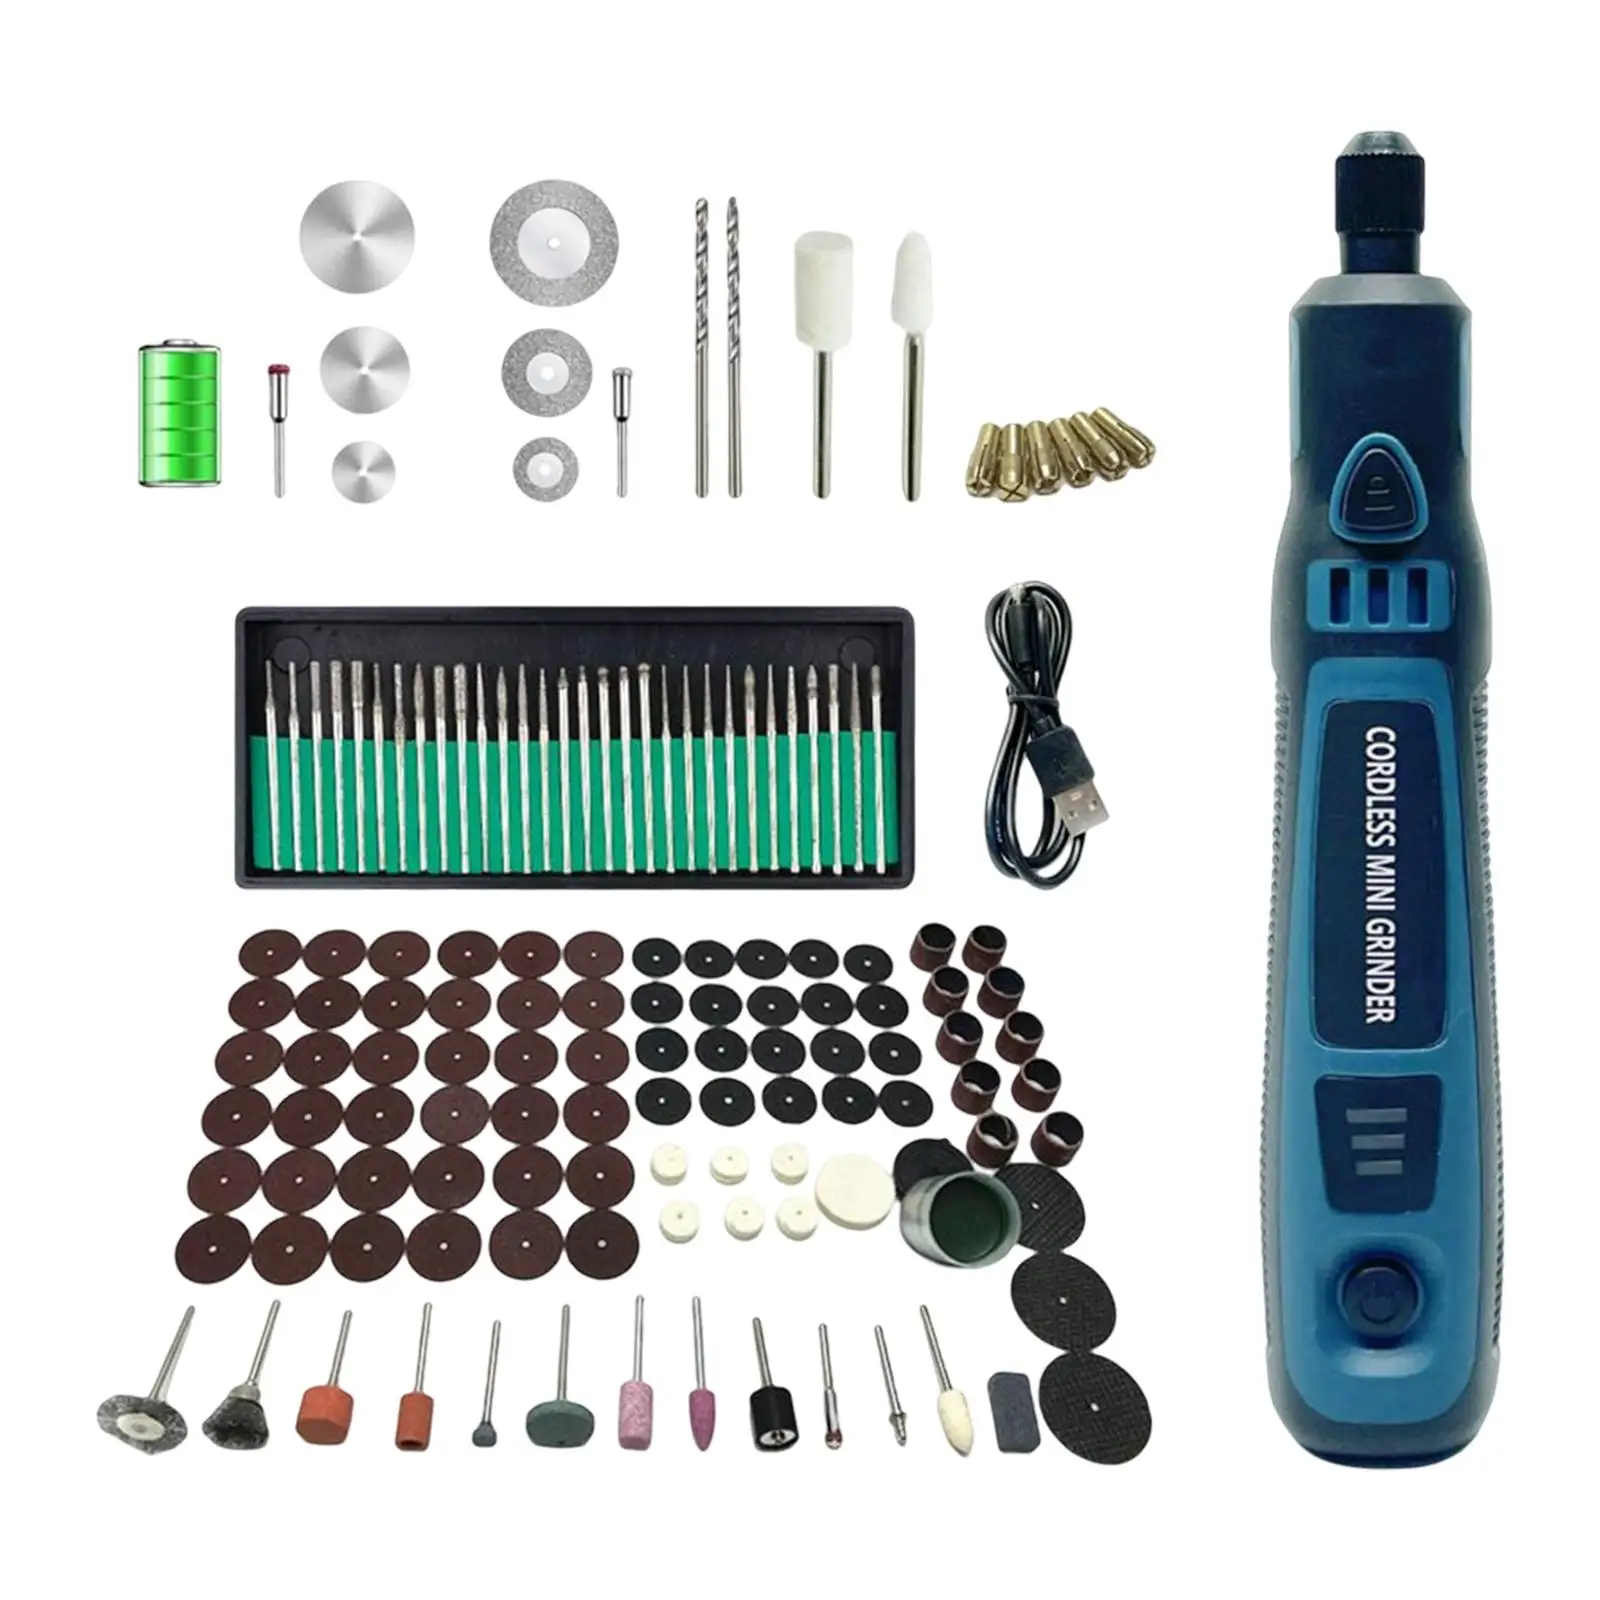 Portable Grinder Kit with Accessories 3 Speeds USB Rechargable for Drilling Sanding